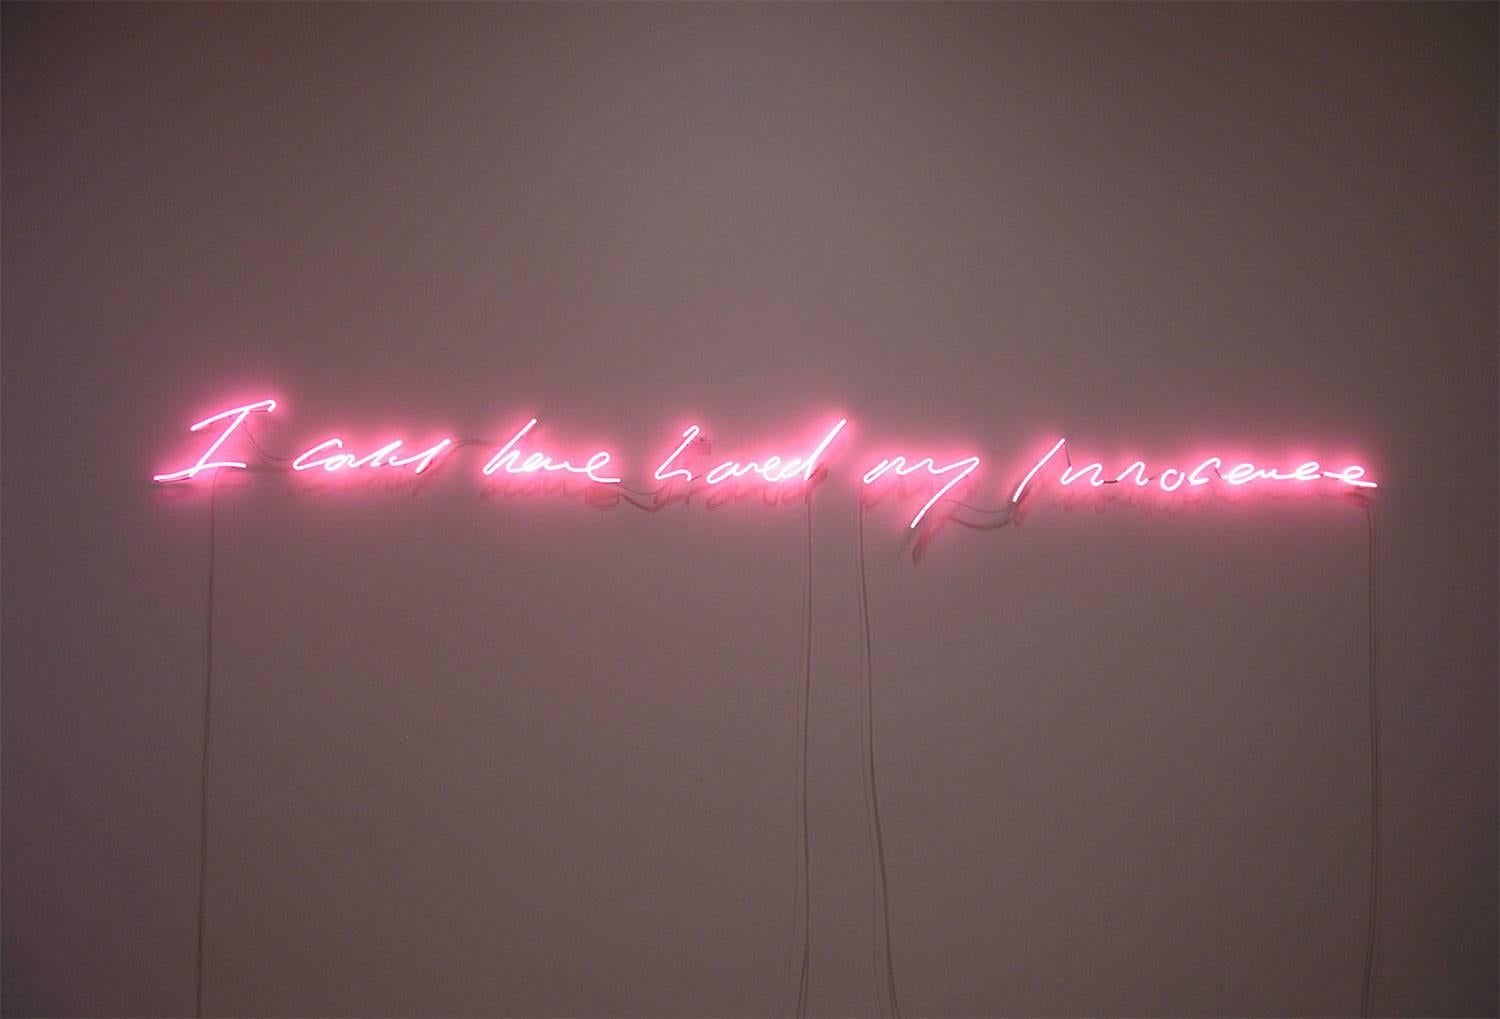 I could have loved my innocence... - Mixed Media Art by Tracey Emin